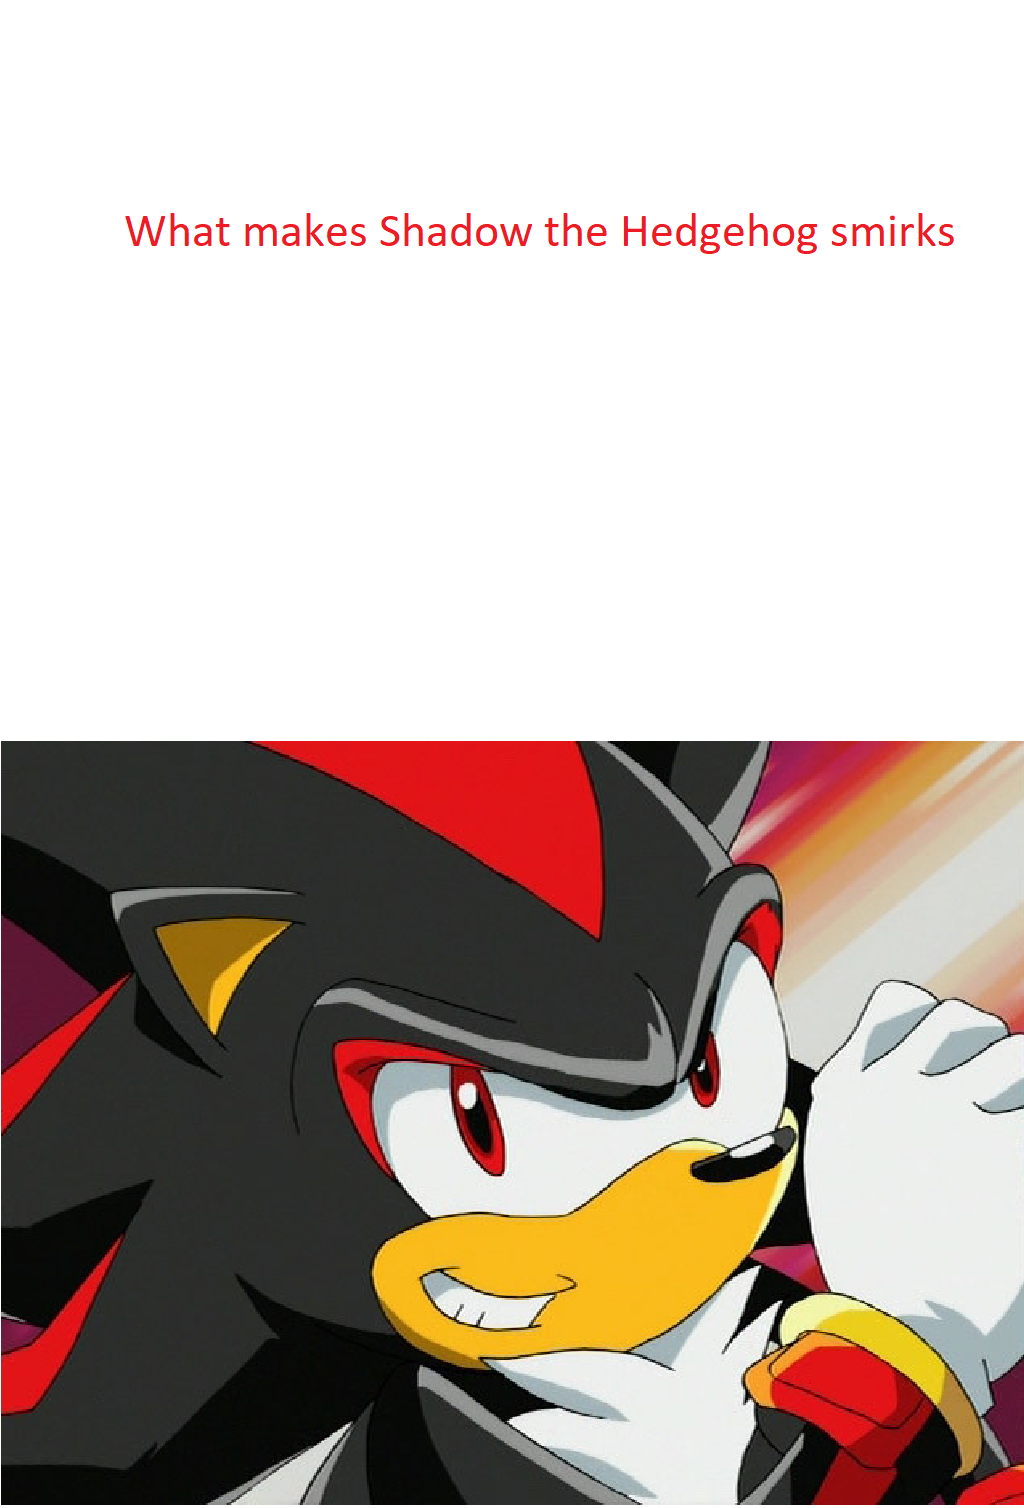 Shadow the Hedgehog smirks at blank meme by JusSonic on DeviantArt